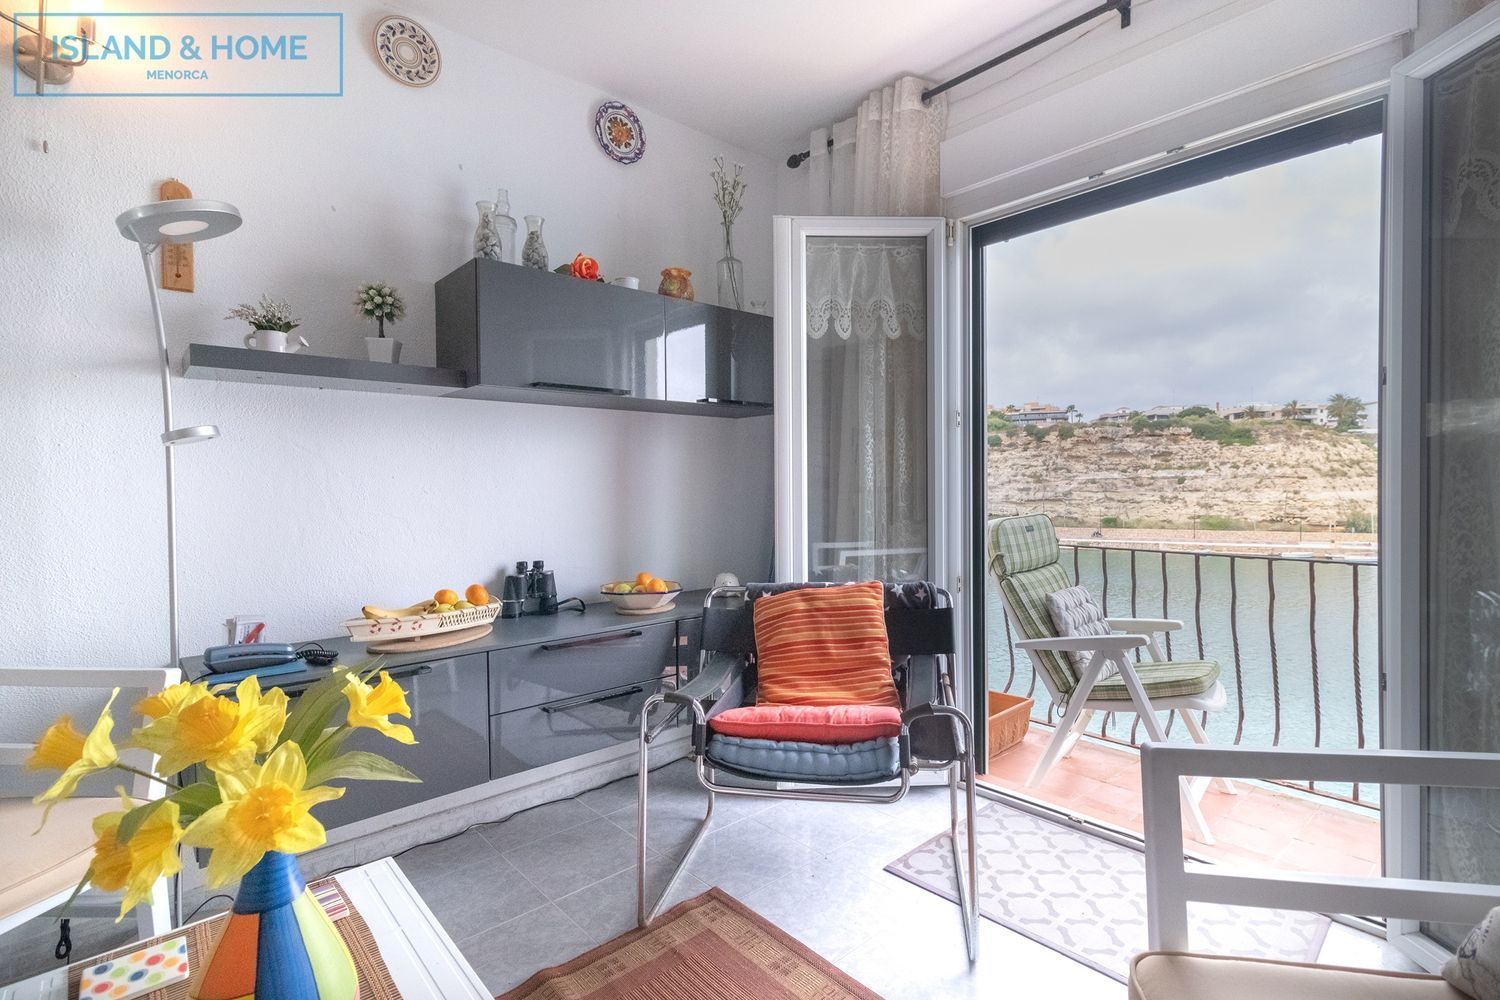 Flat for sale on the seafront in Calle Moll del Fonduco, Menorca